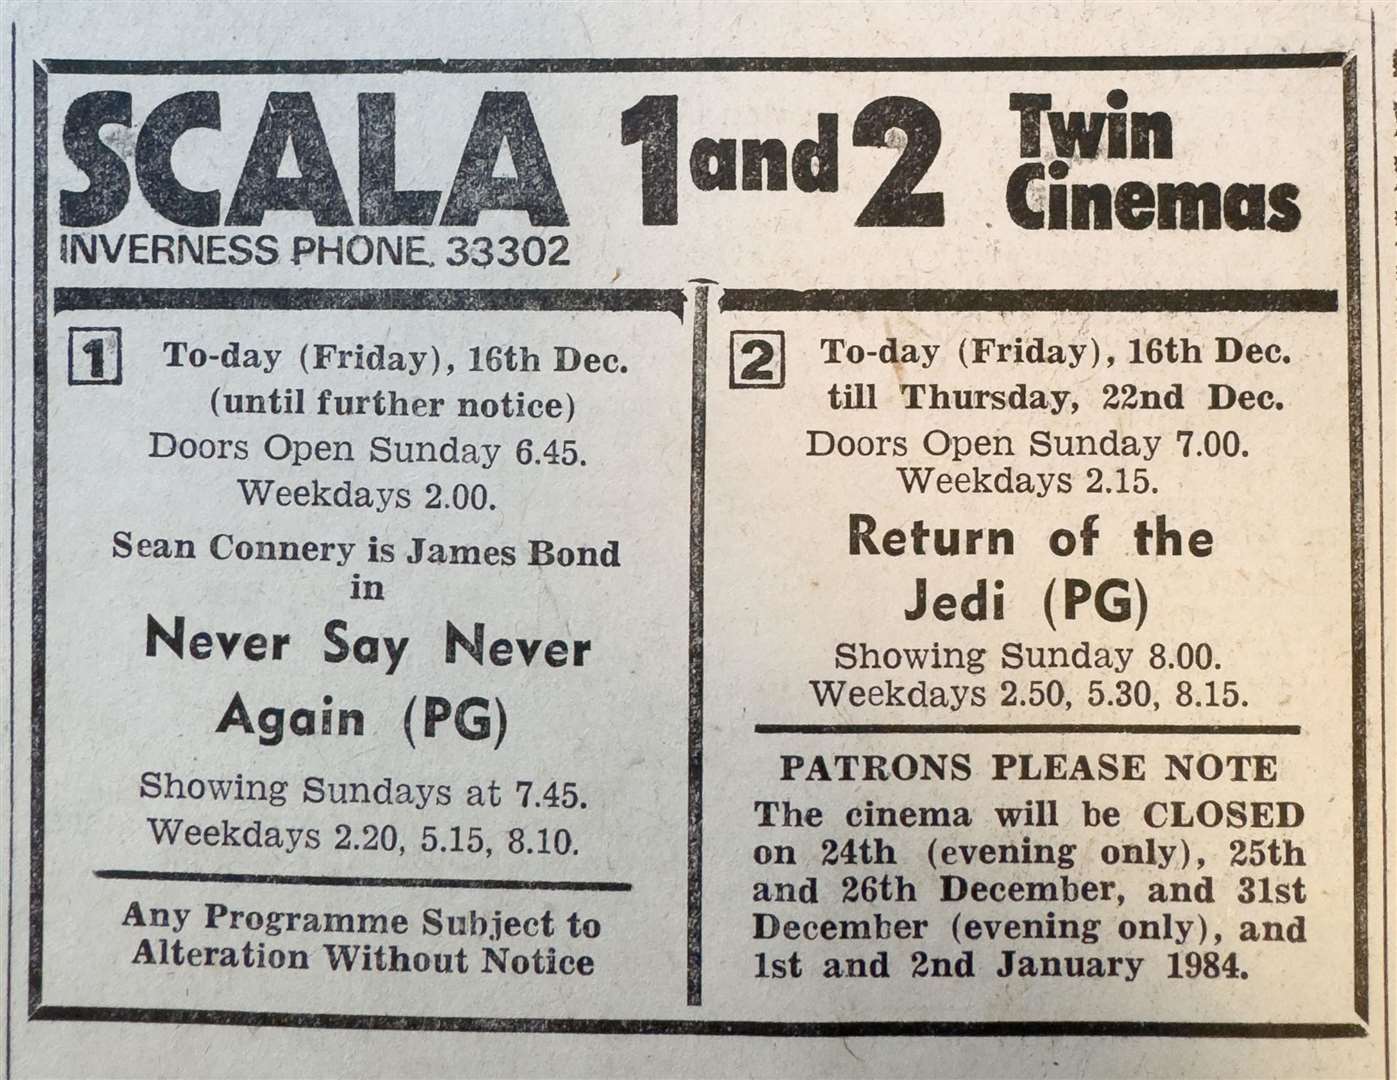 The films showing at La Scala Christmas 1983.